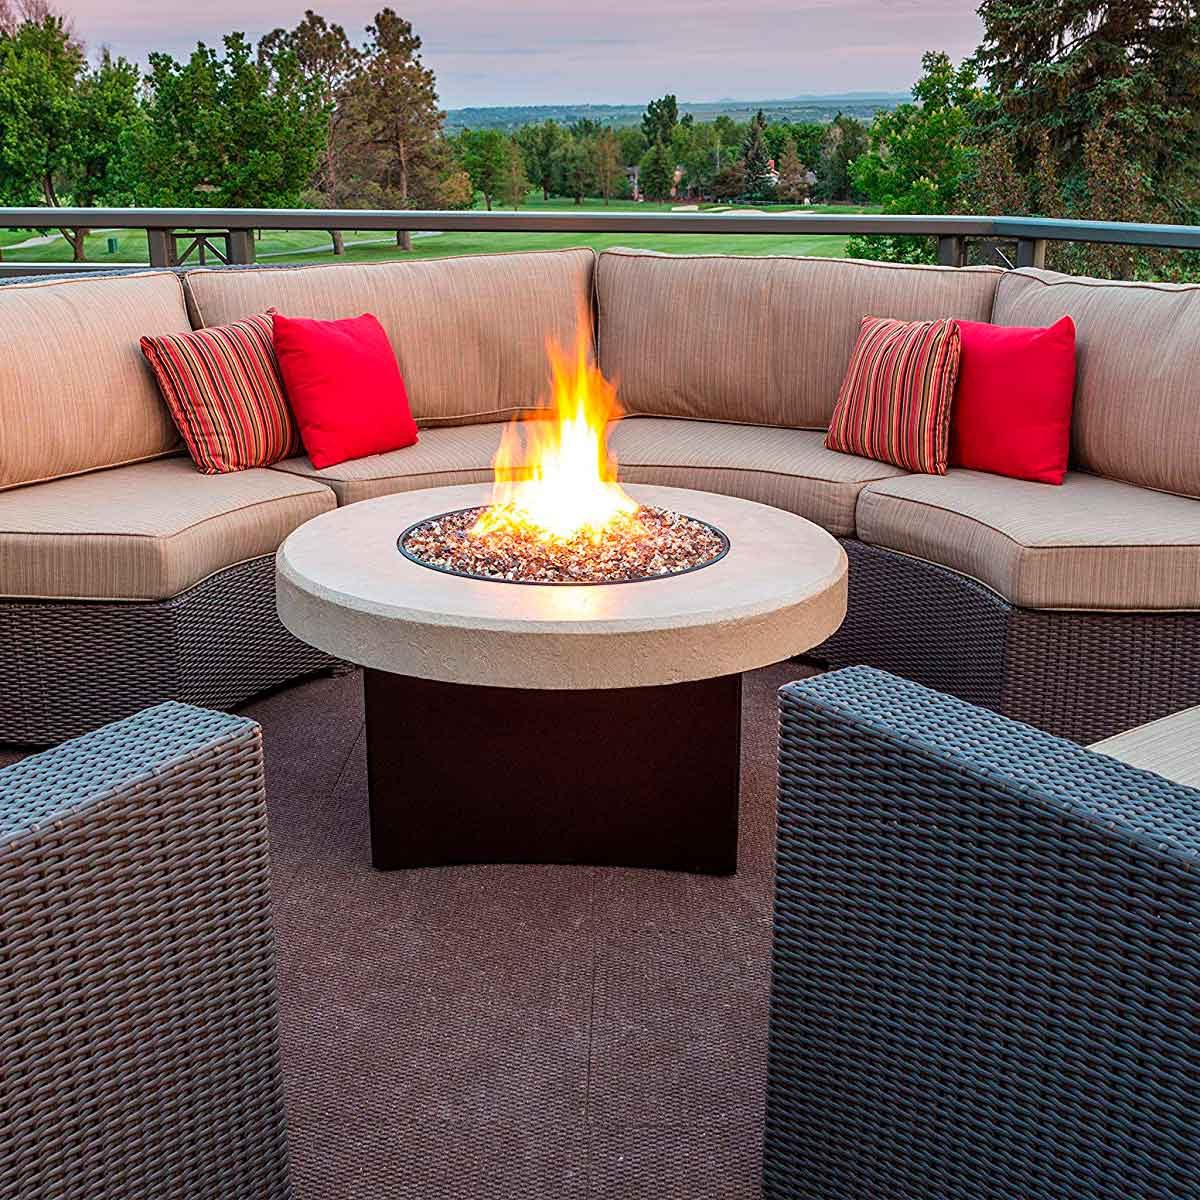 10 Really Cool Gas Fire Pits For Your Backyard Propane Fire Pit Ideas